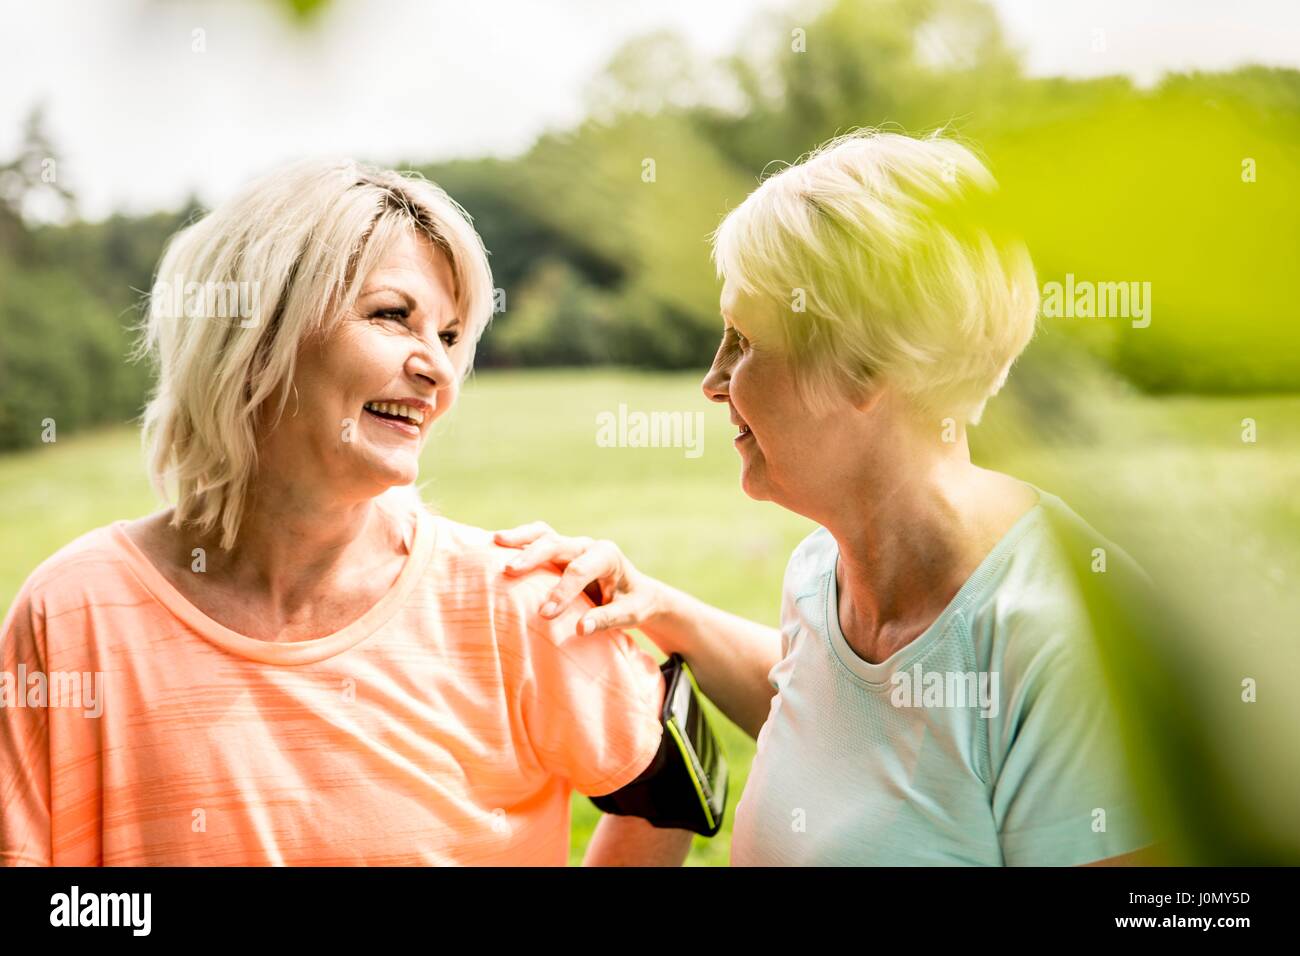 Two women resting after exercise. Stock Photo